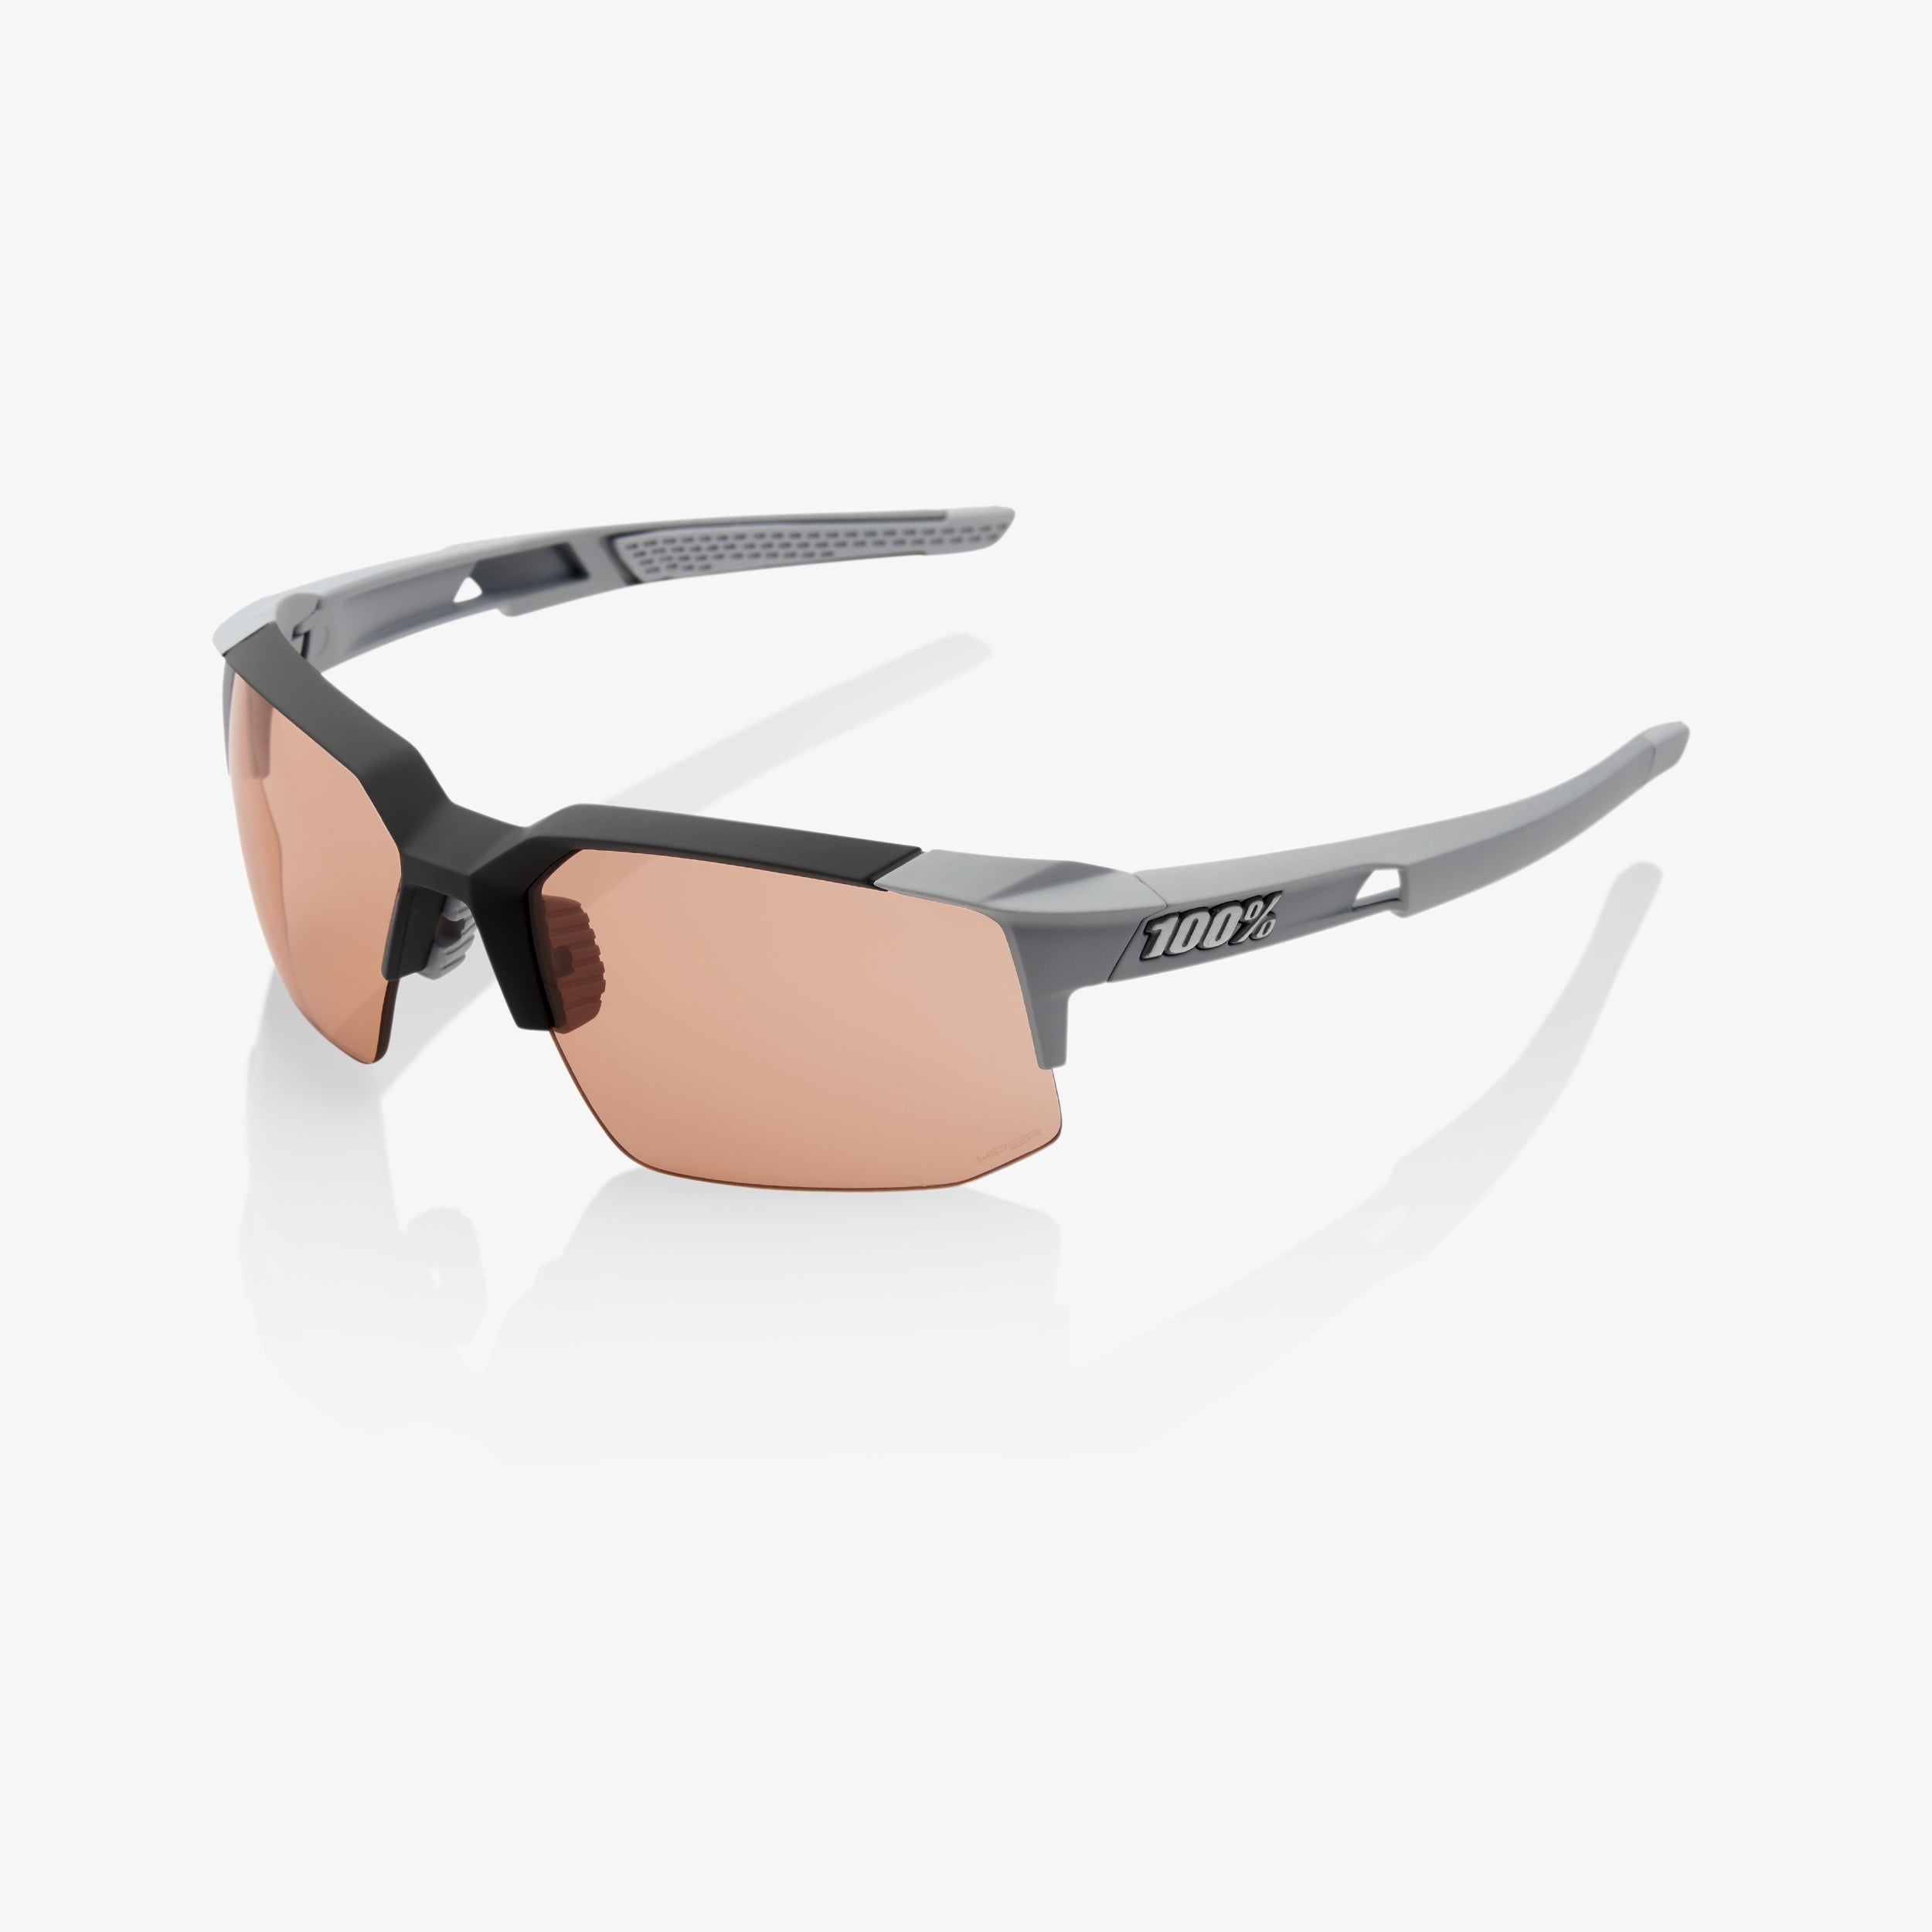 SPEEDCOUPE - Soft Tact Stone Grey - HiPER Coral Lens